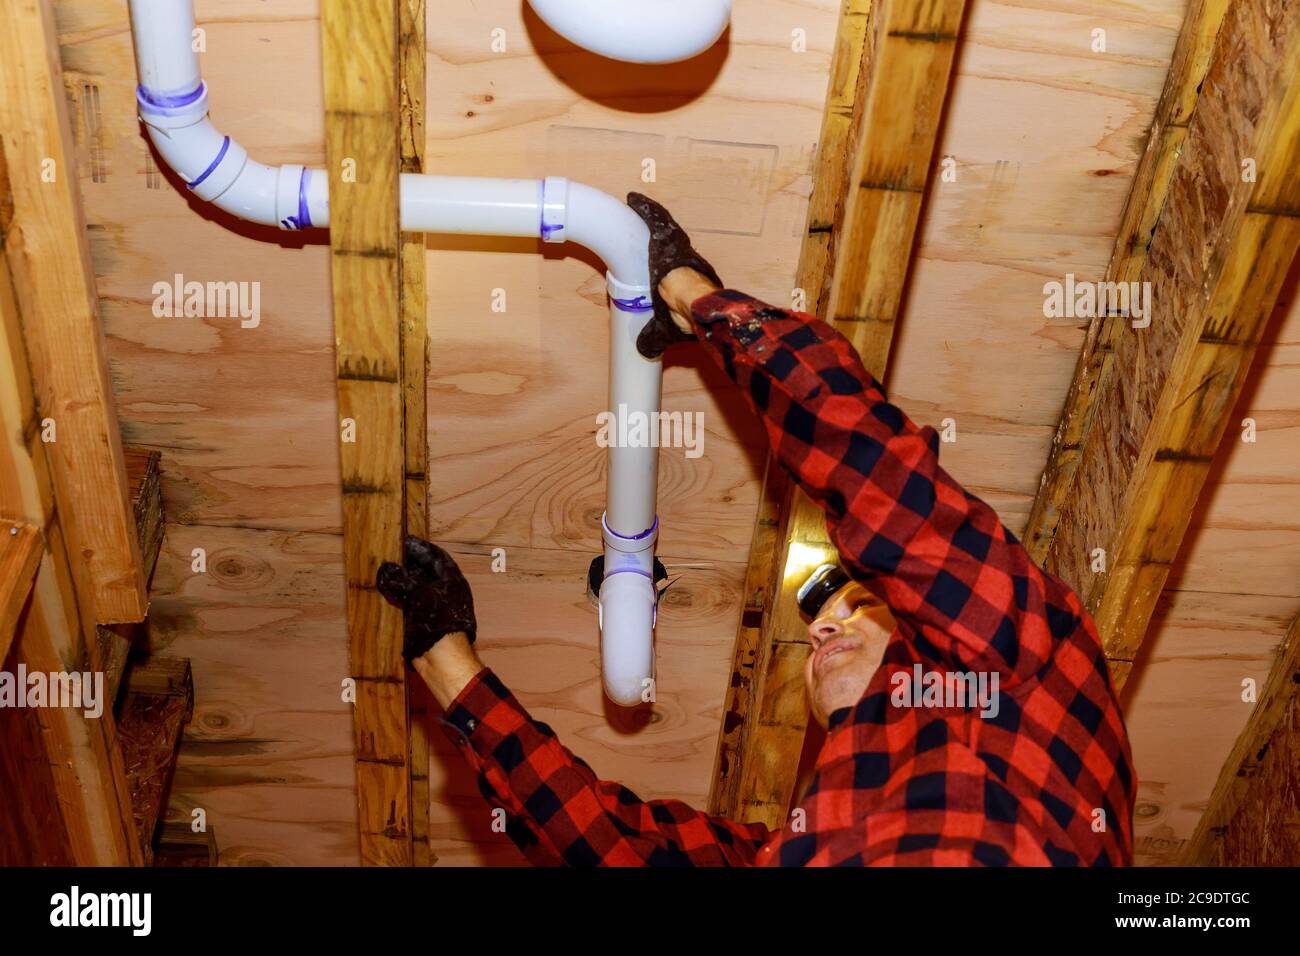 Workers are sewer toilet pipes with PVC joints allows the split the make PVC pipe coming out the other side the buildingceiling beam house. Stock Photo